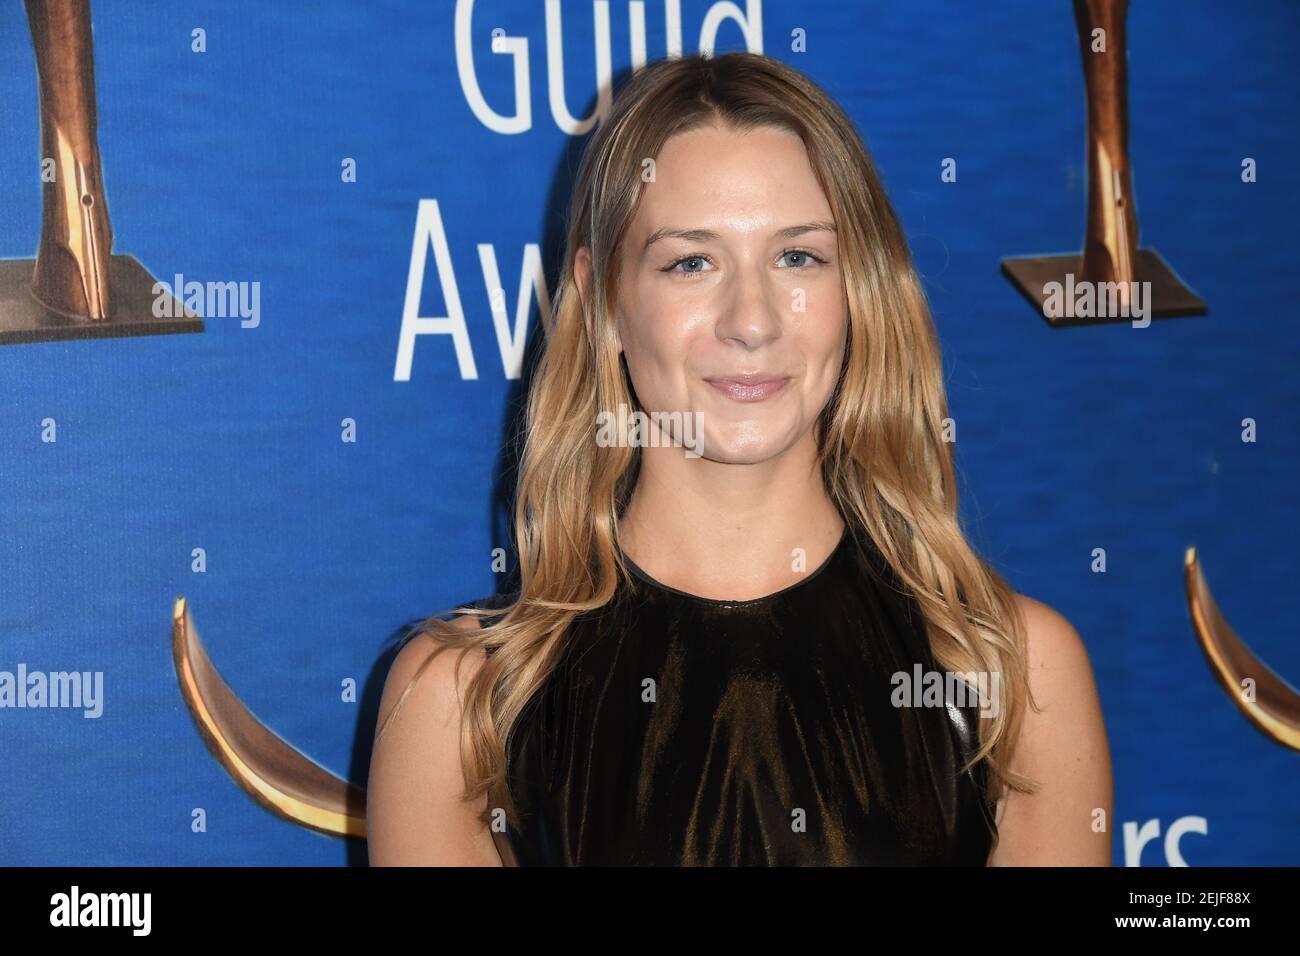 Alessandra Dimona walks the carpet at the 2020 Writers Guild